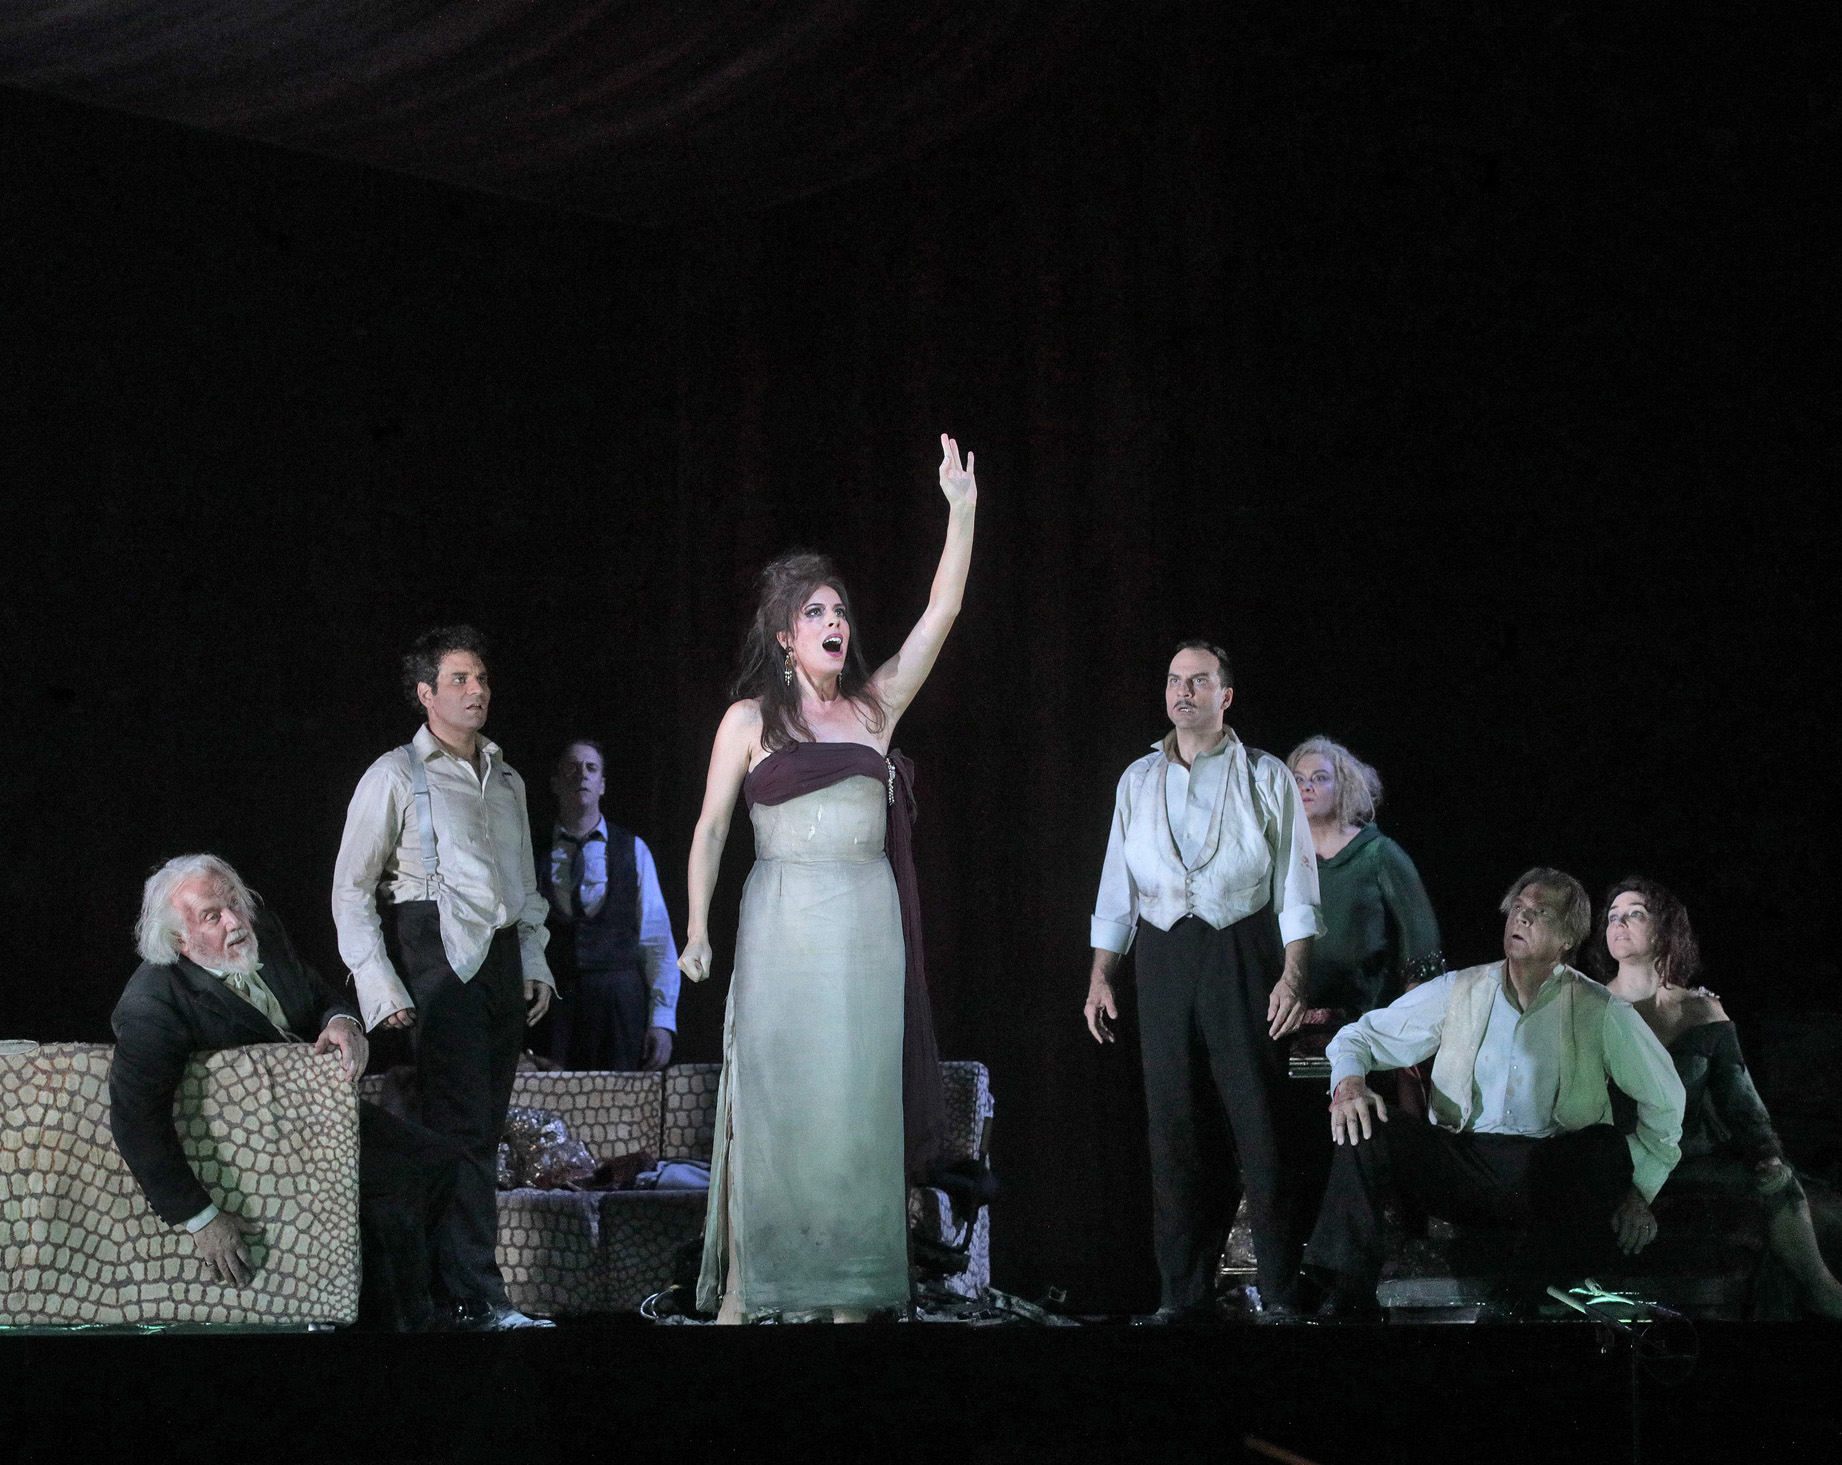 Audrey Luna in The Exterminating Angel: The highest note in New York